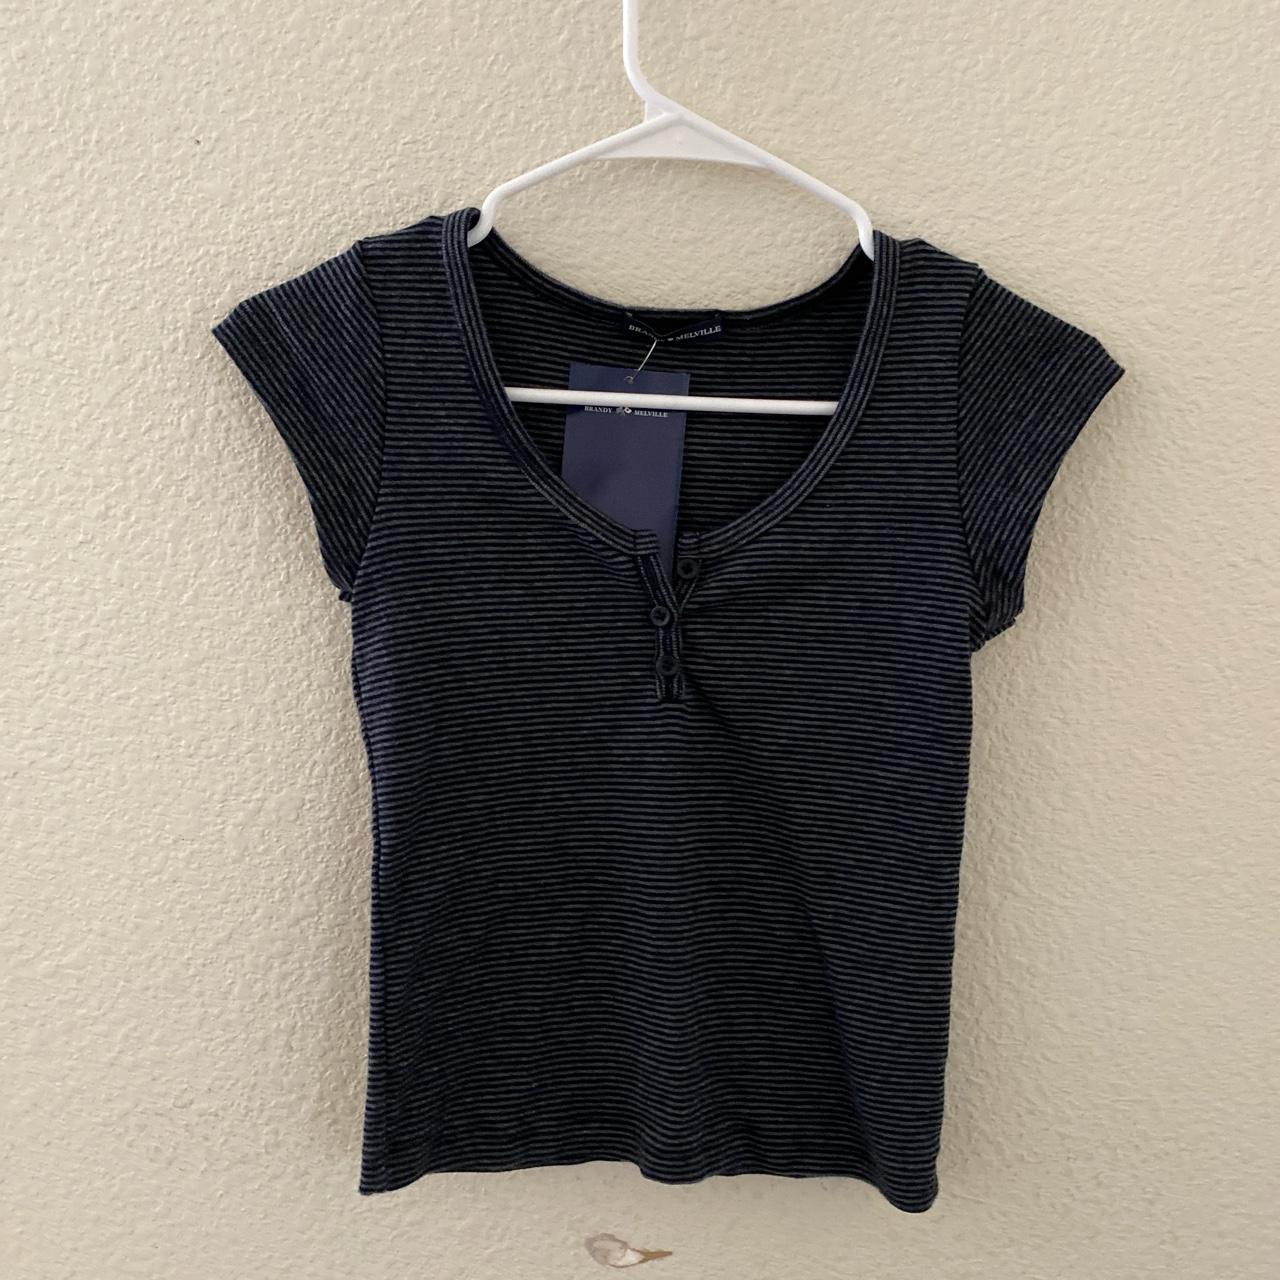 Brandy melville Zelly striped 3 button top